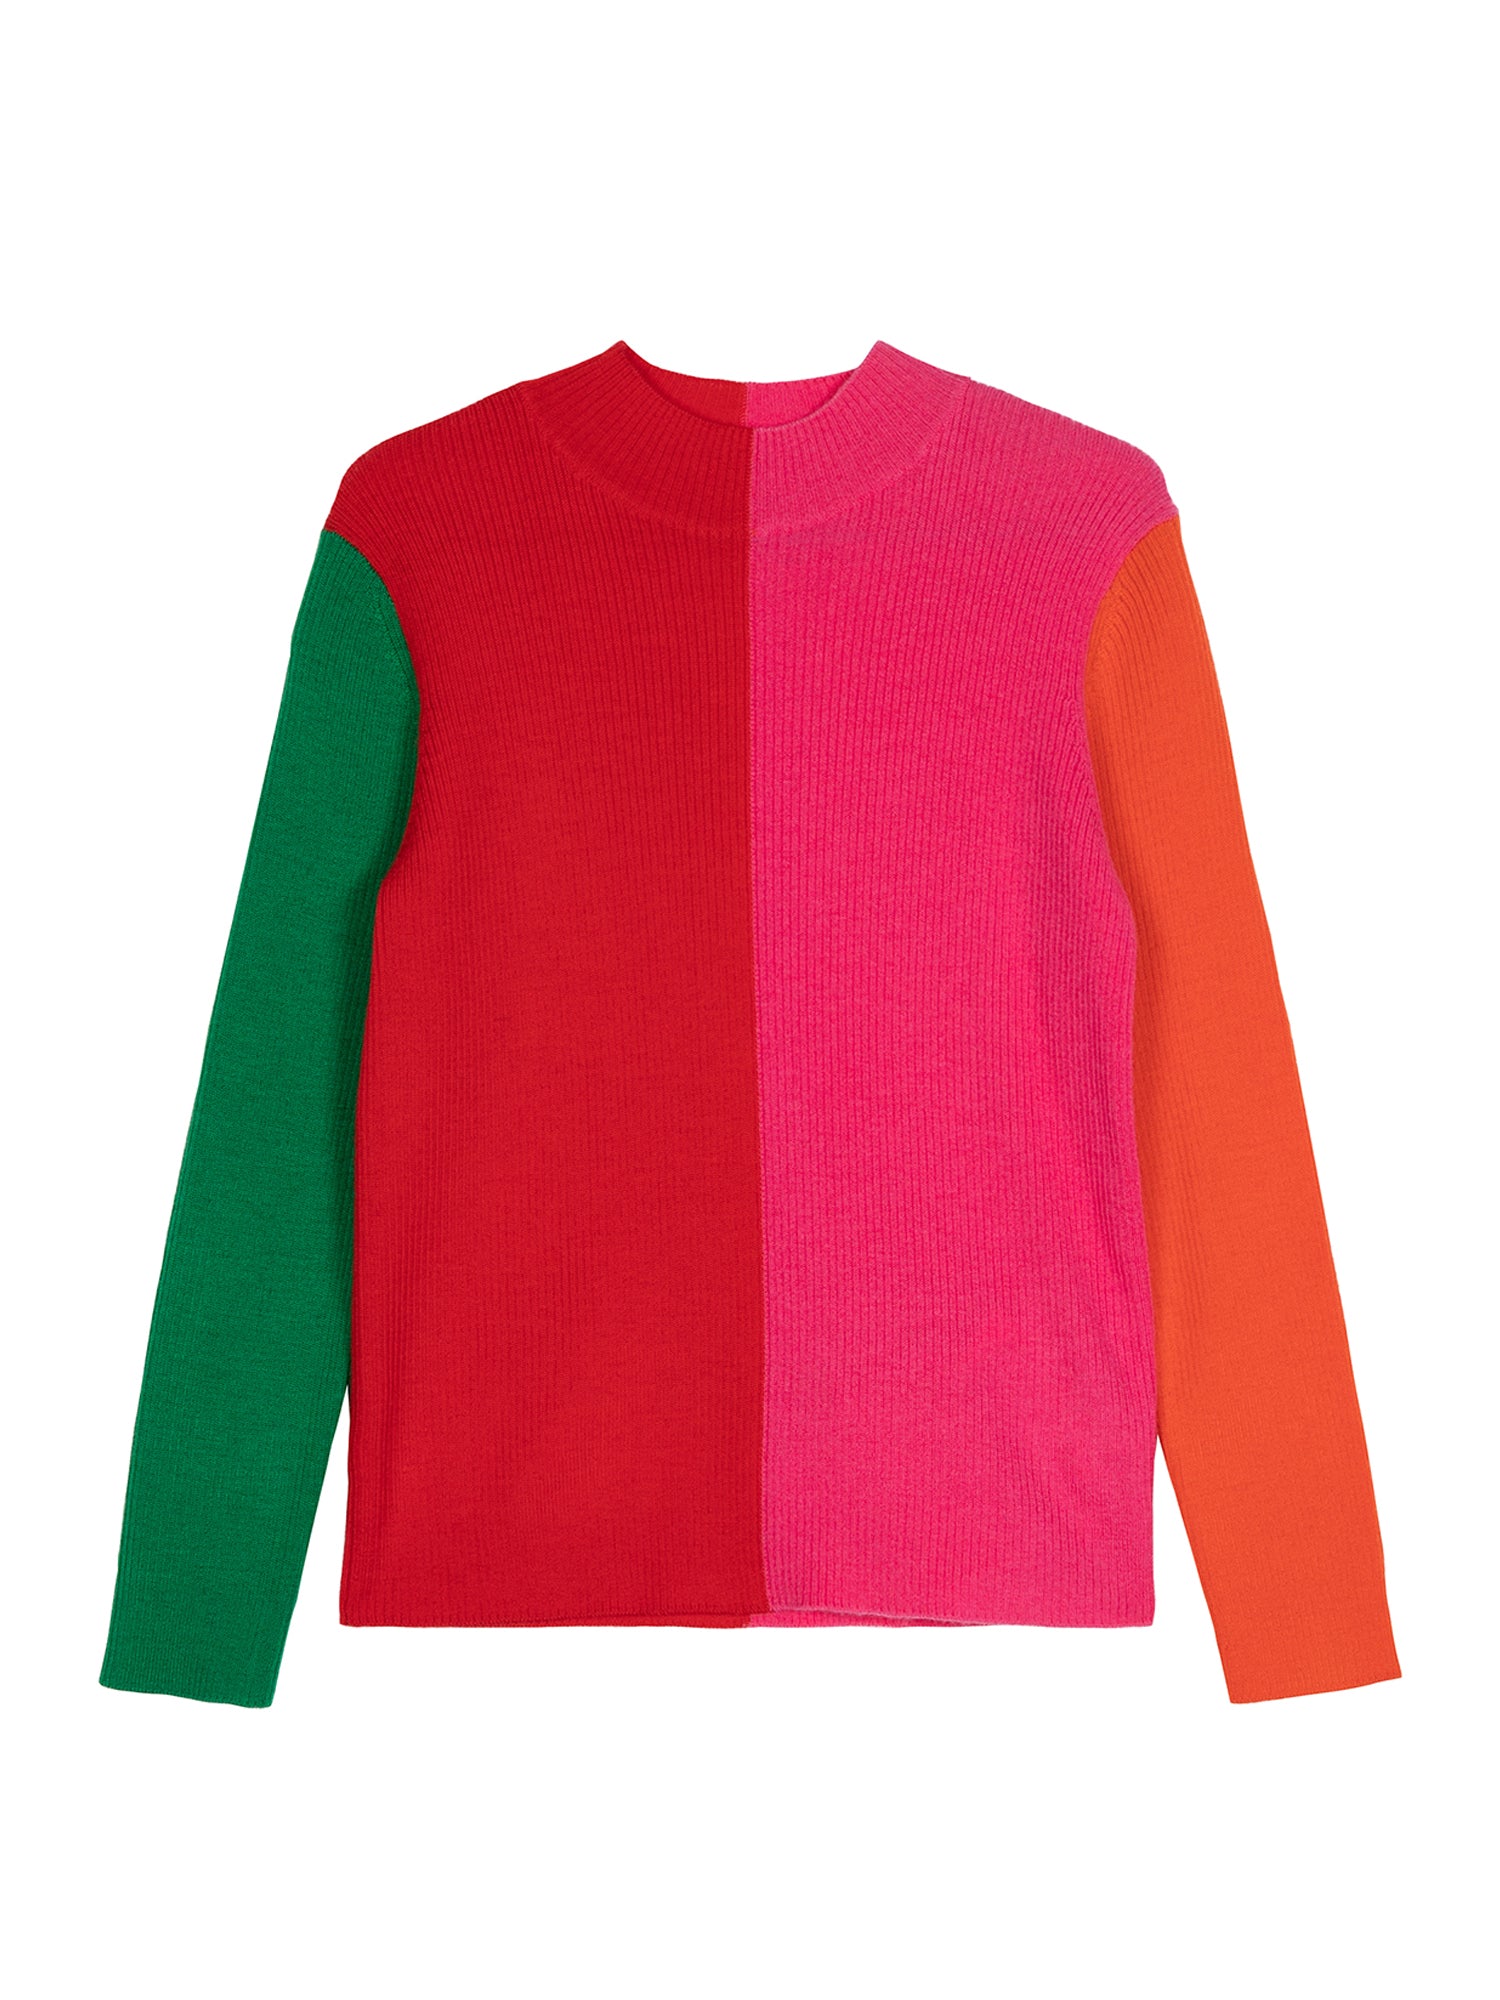 JNBY Candy Color-Block Sweater - Shirts & Tops